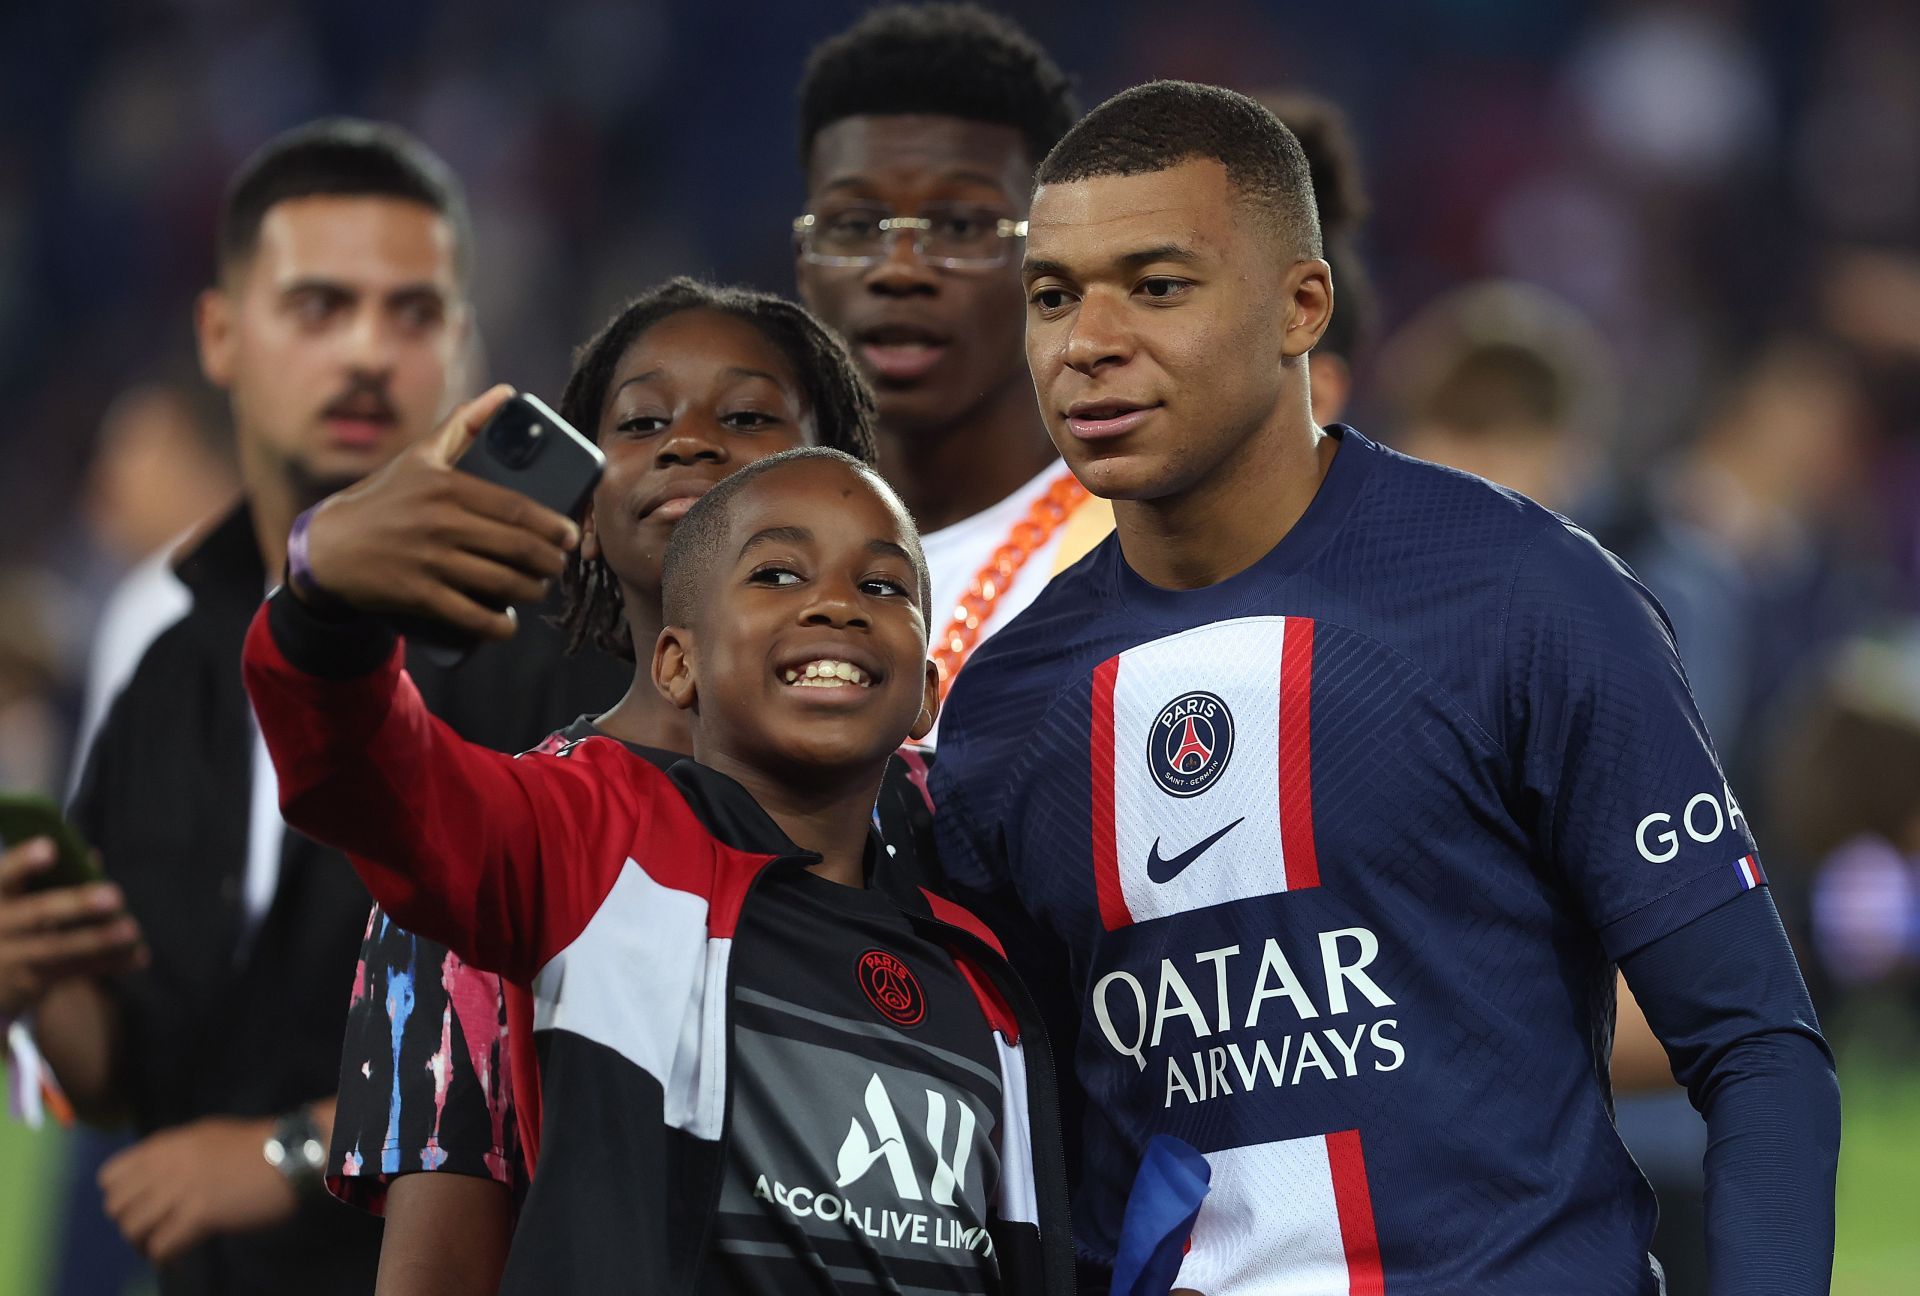 Mbappe has won five Ligue 1 titles with PSG.